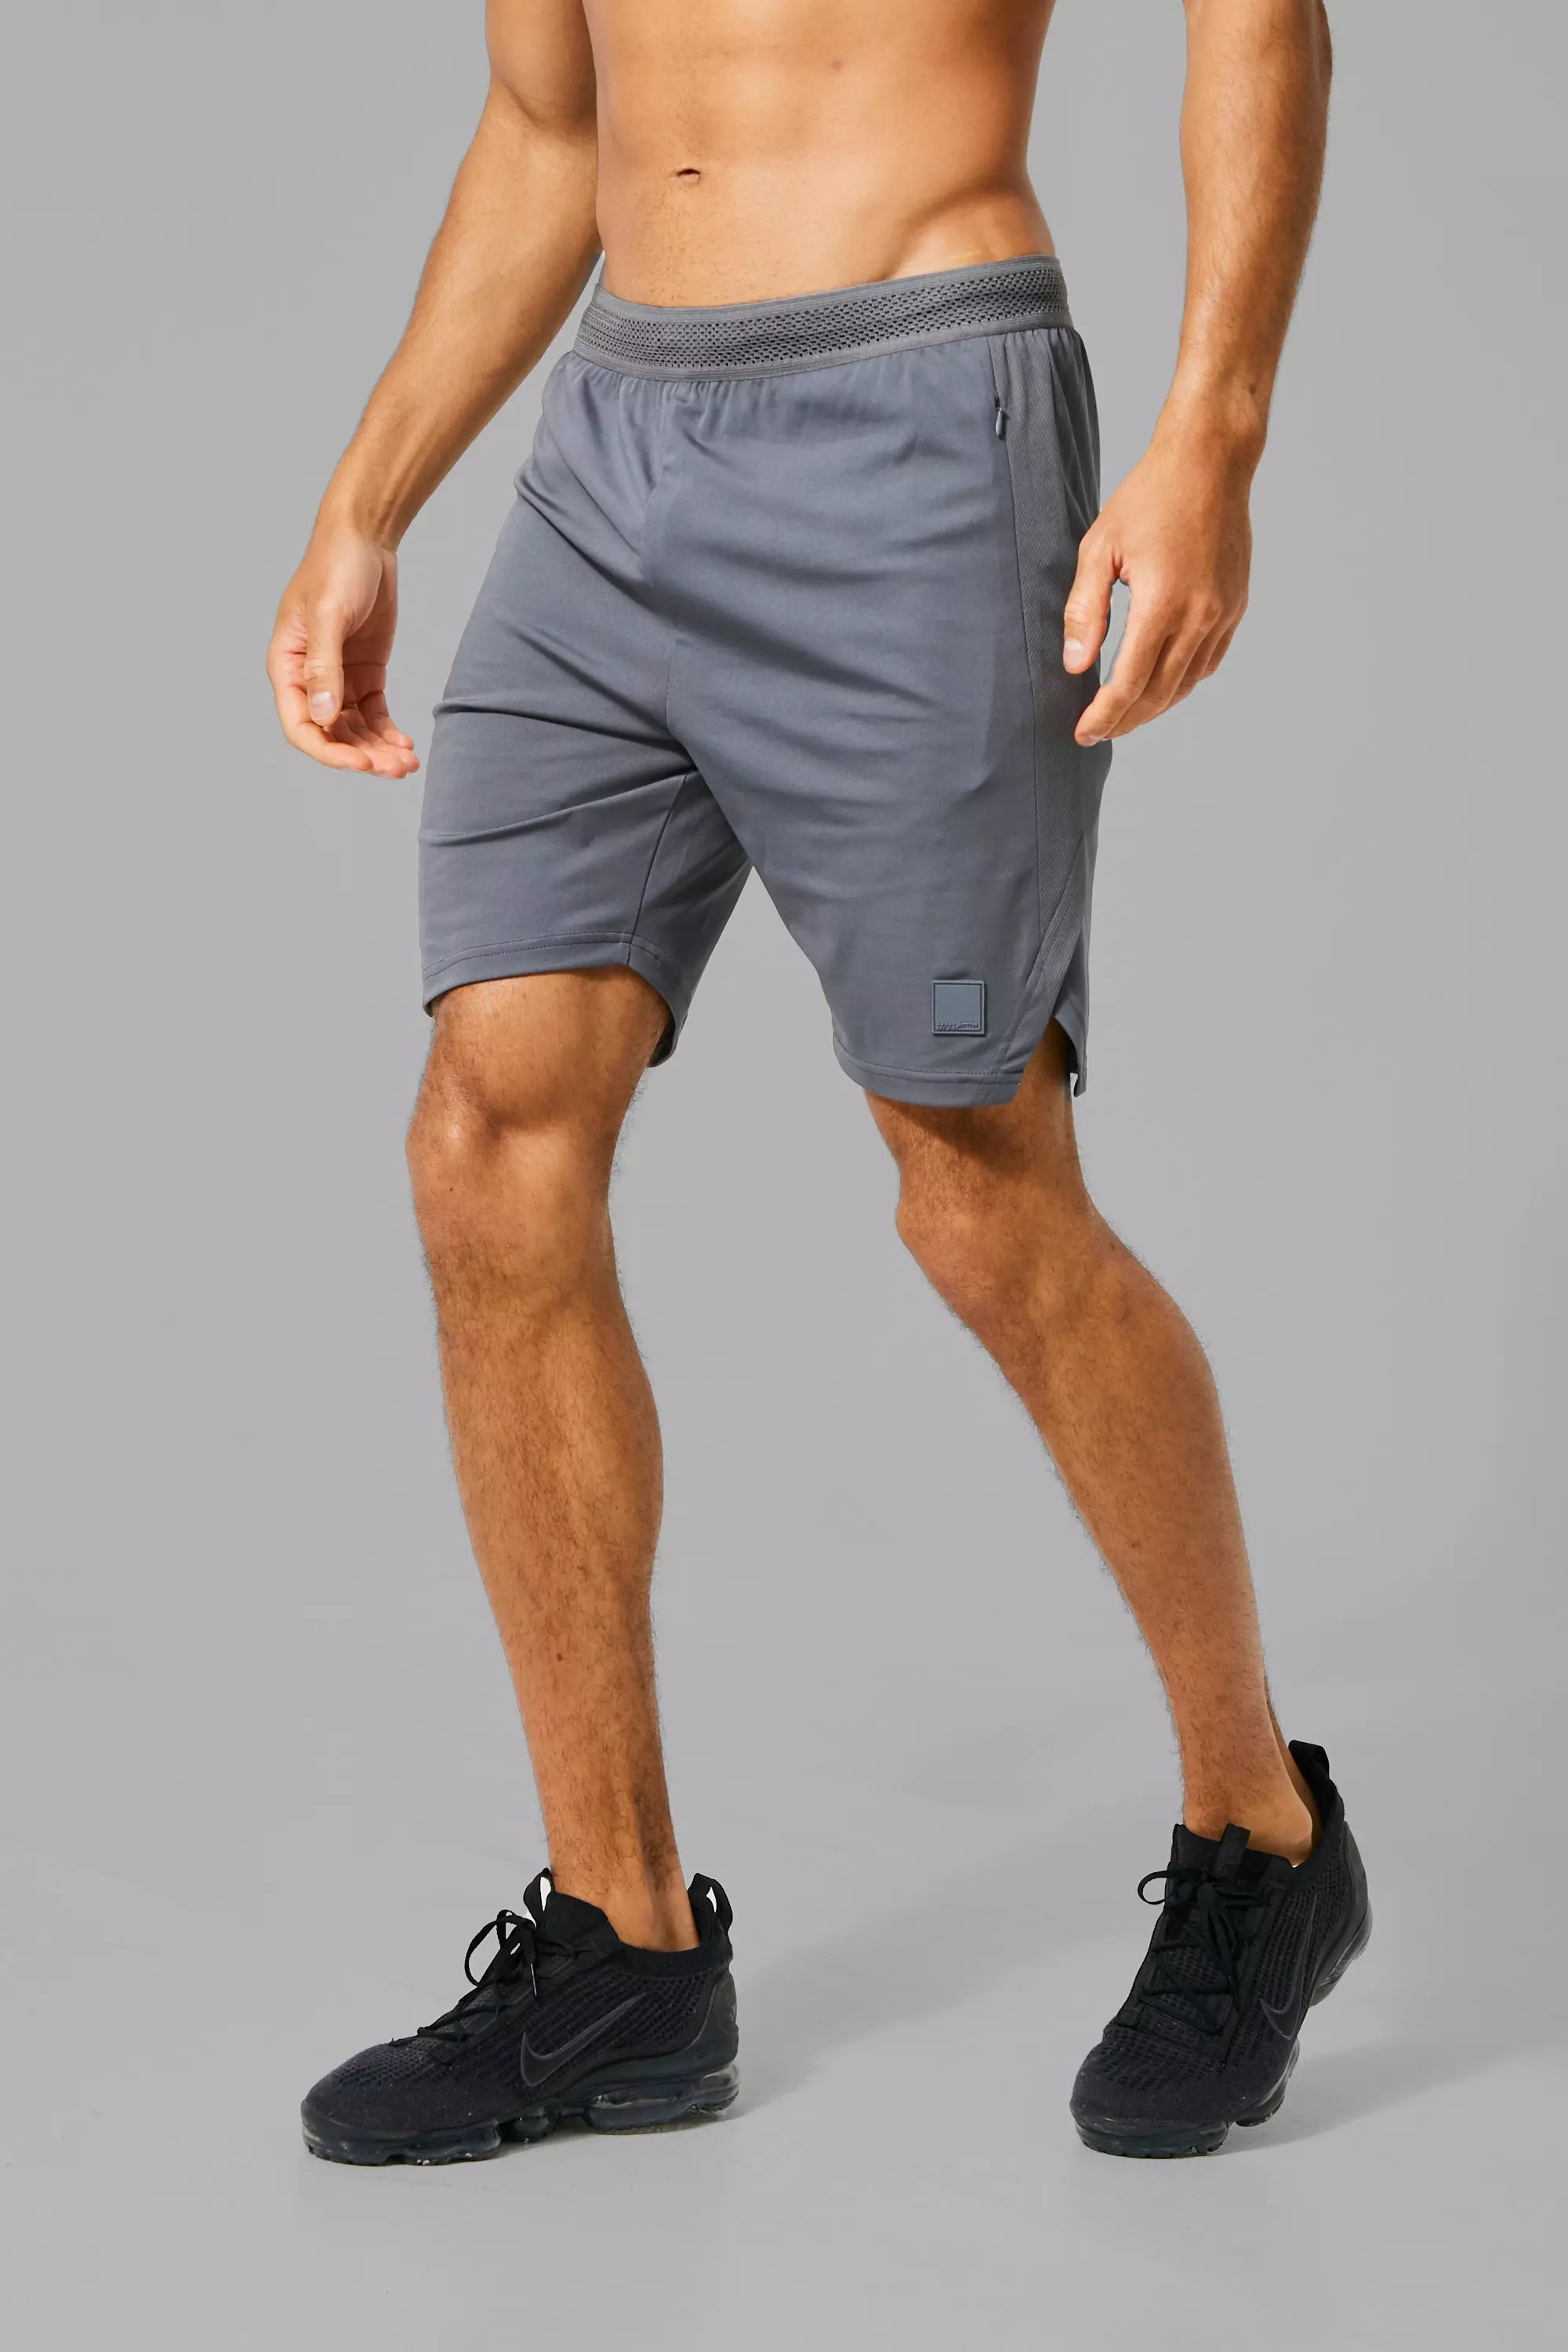 Under Armour, Woven Shorts Mens, Performance Shorts